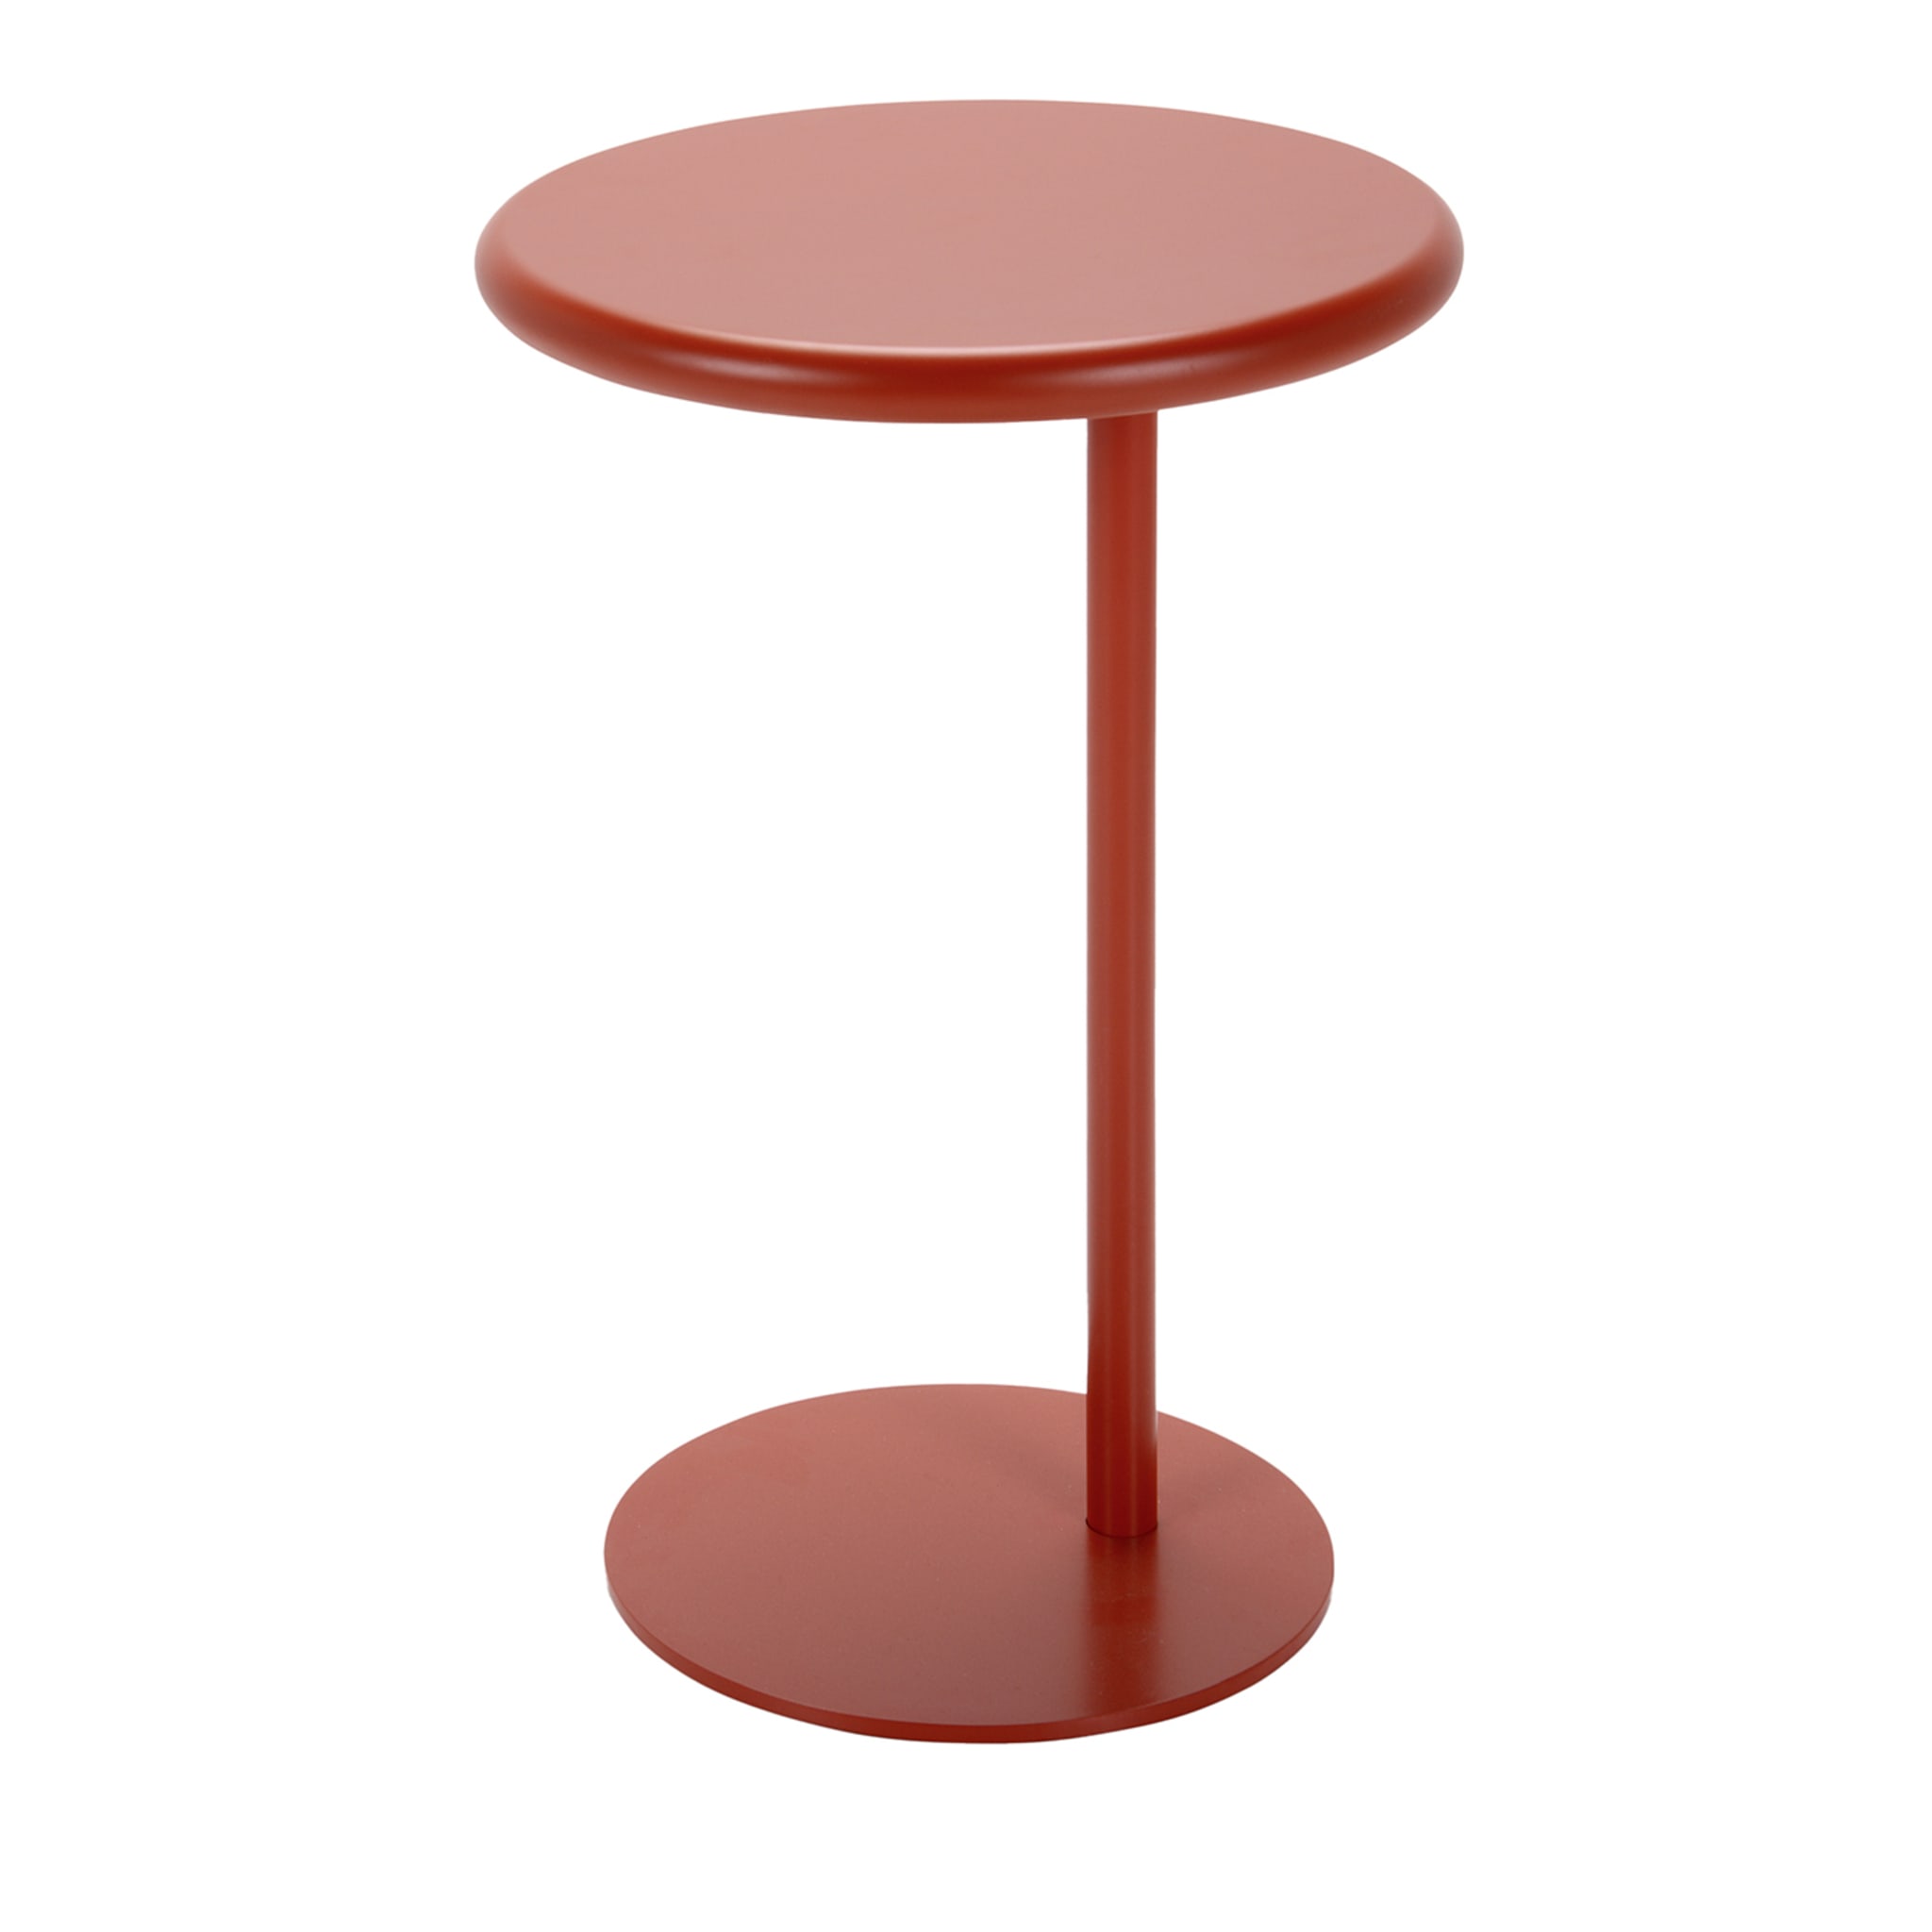 Red Biscuit Small Side Table by Kazuko Okamoto - Main view